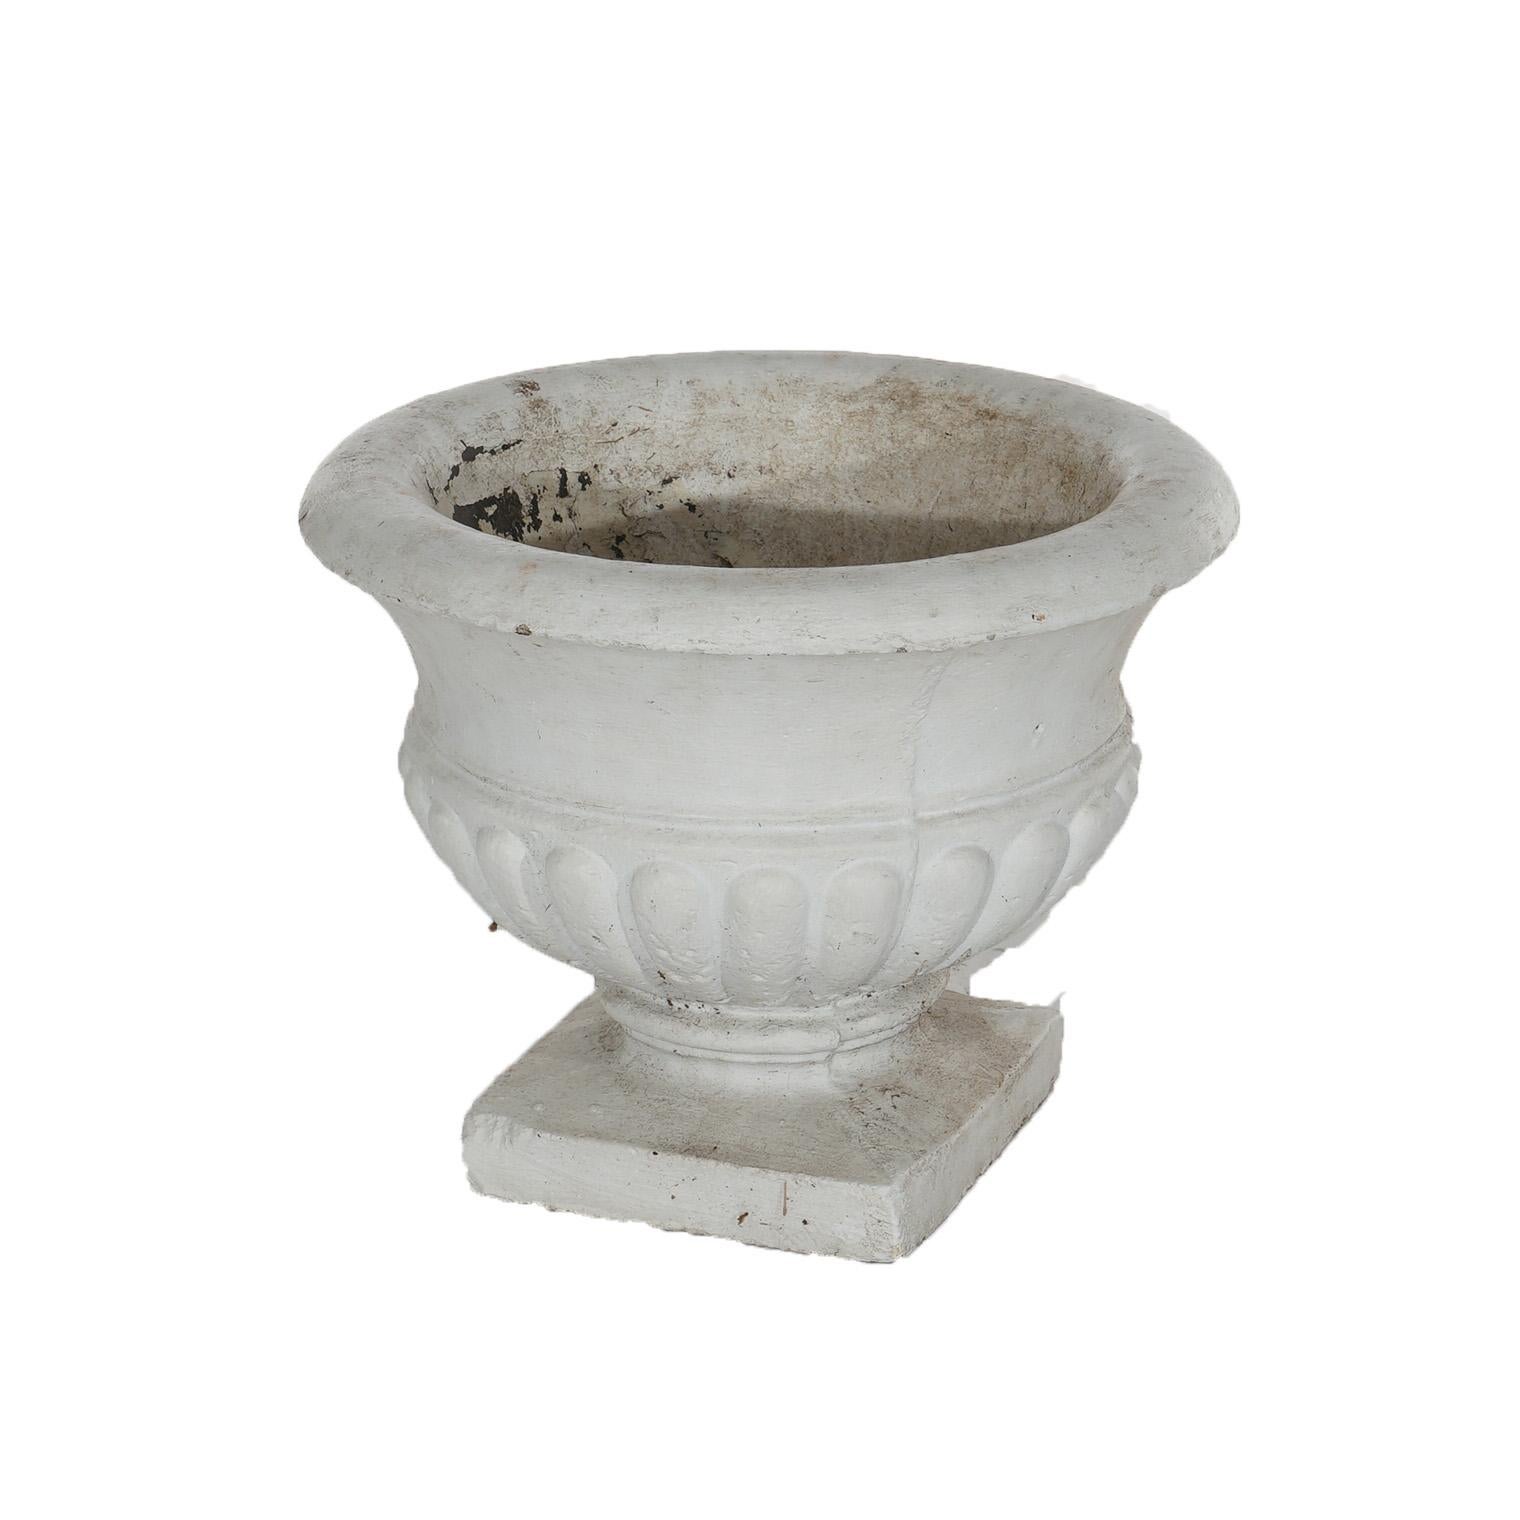 ***Ask About Reduced In-House Shipping Rates - Reliable Service & Fully Insured***
Classical Painted Cast Hardstone Mellon Bowl Garden Urn 20th C

Measures- 12''H x 14.5''W x 14.5''D